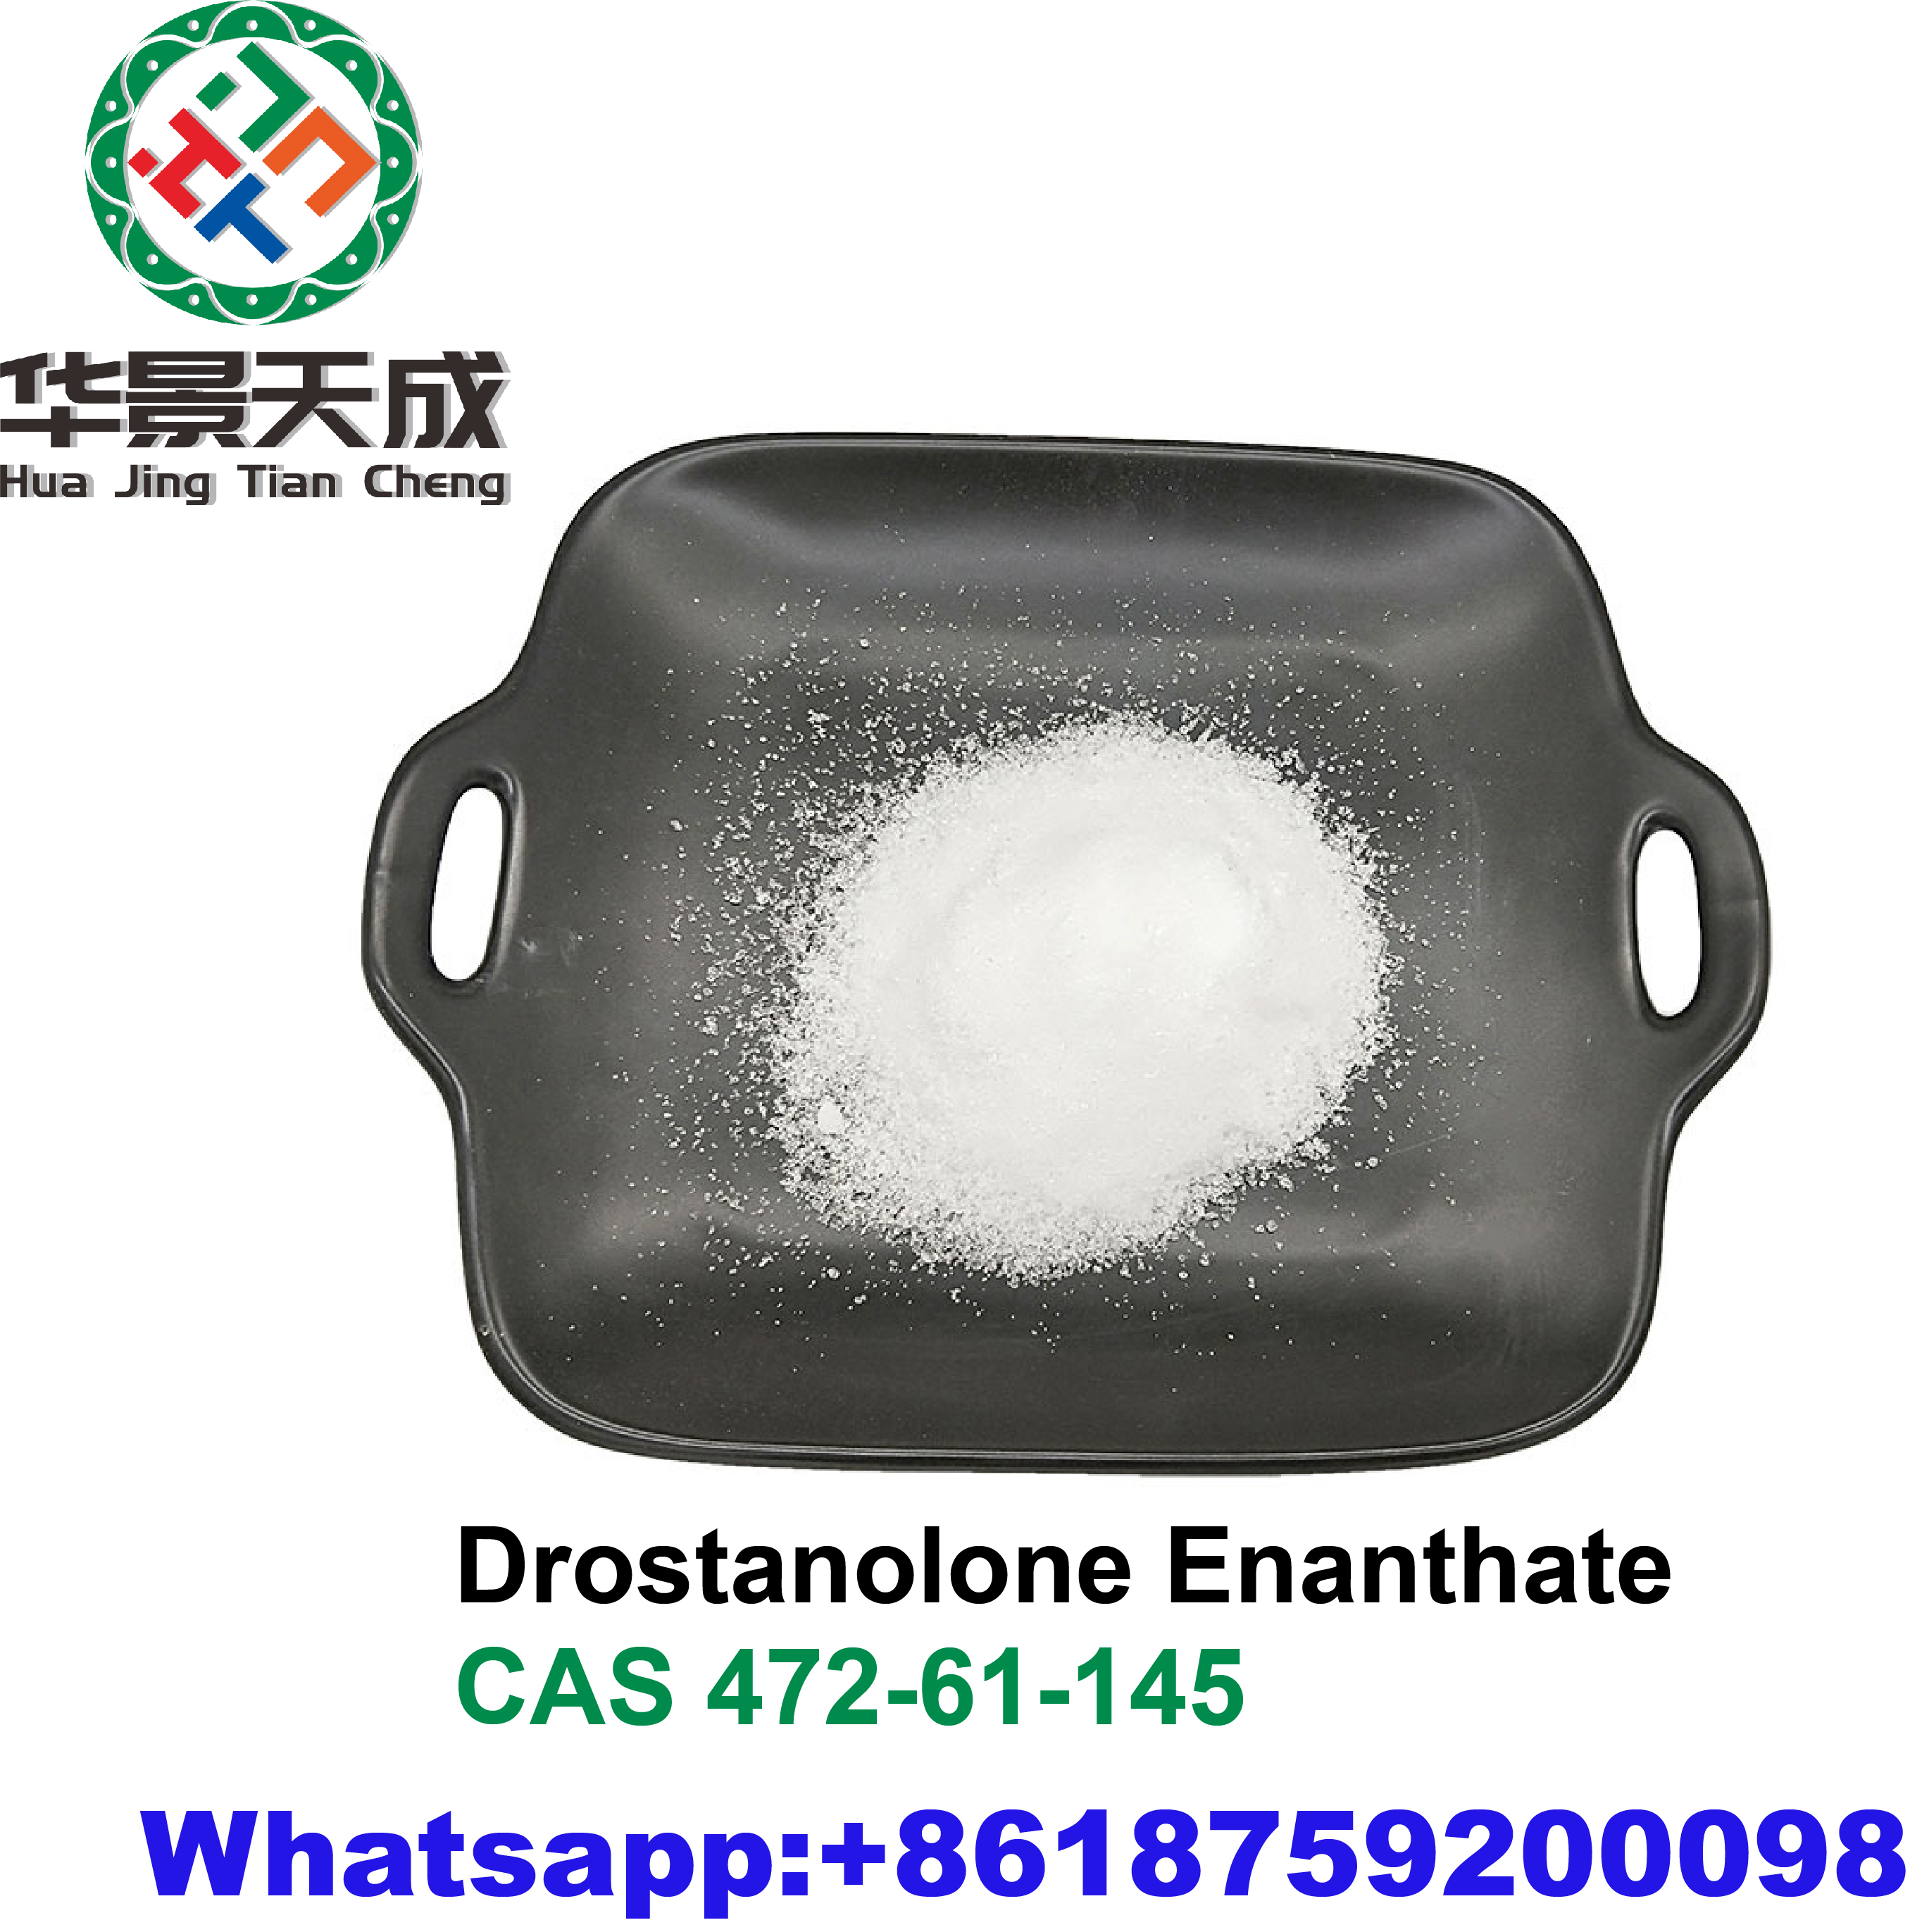 Masteron E Powder CAS 472-61-145 Effective Anabolic Bodybuilding Steroids Supplements Drostanolone Enanthate Featured Image